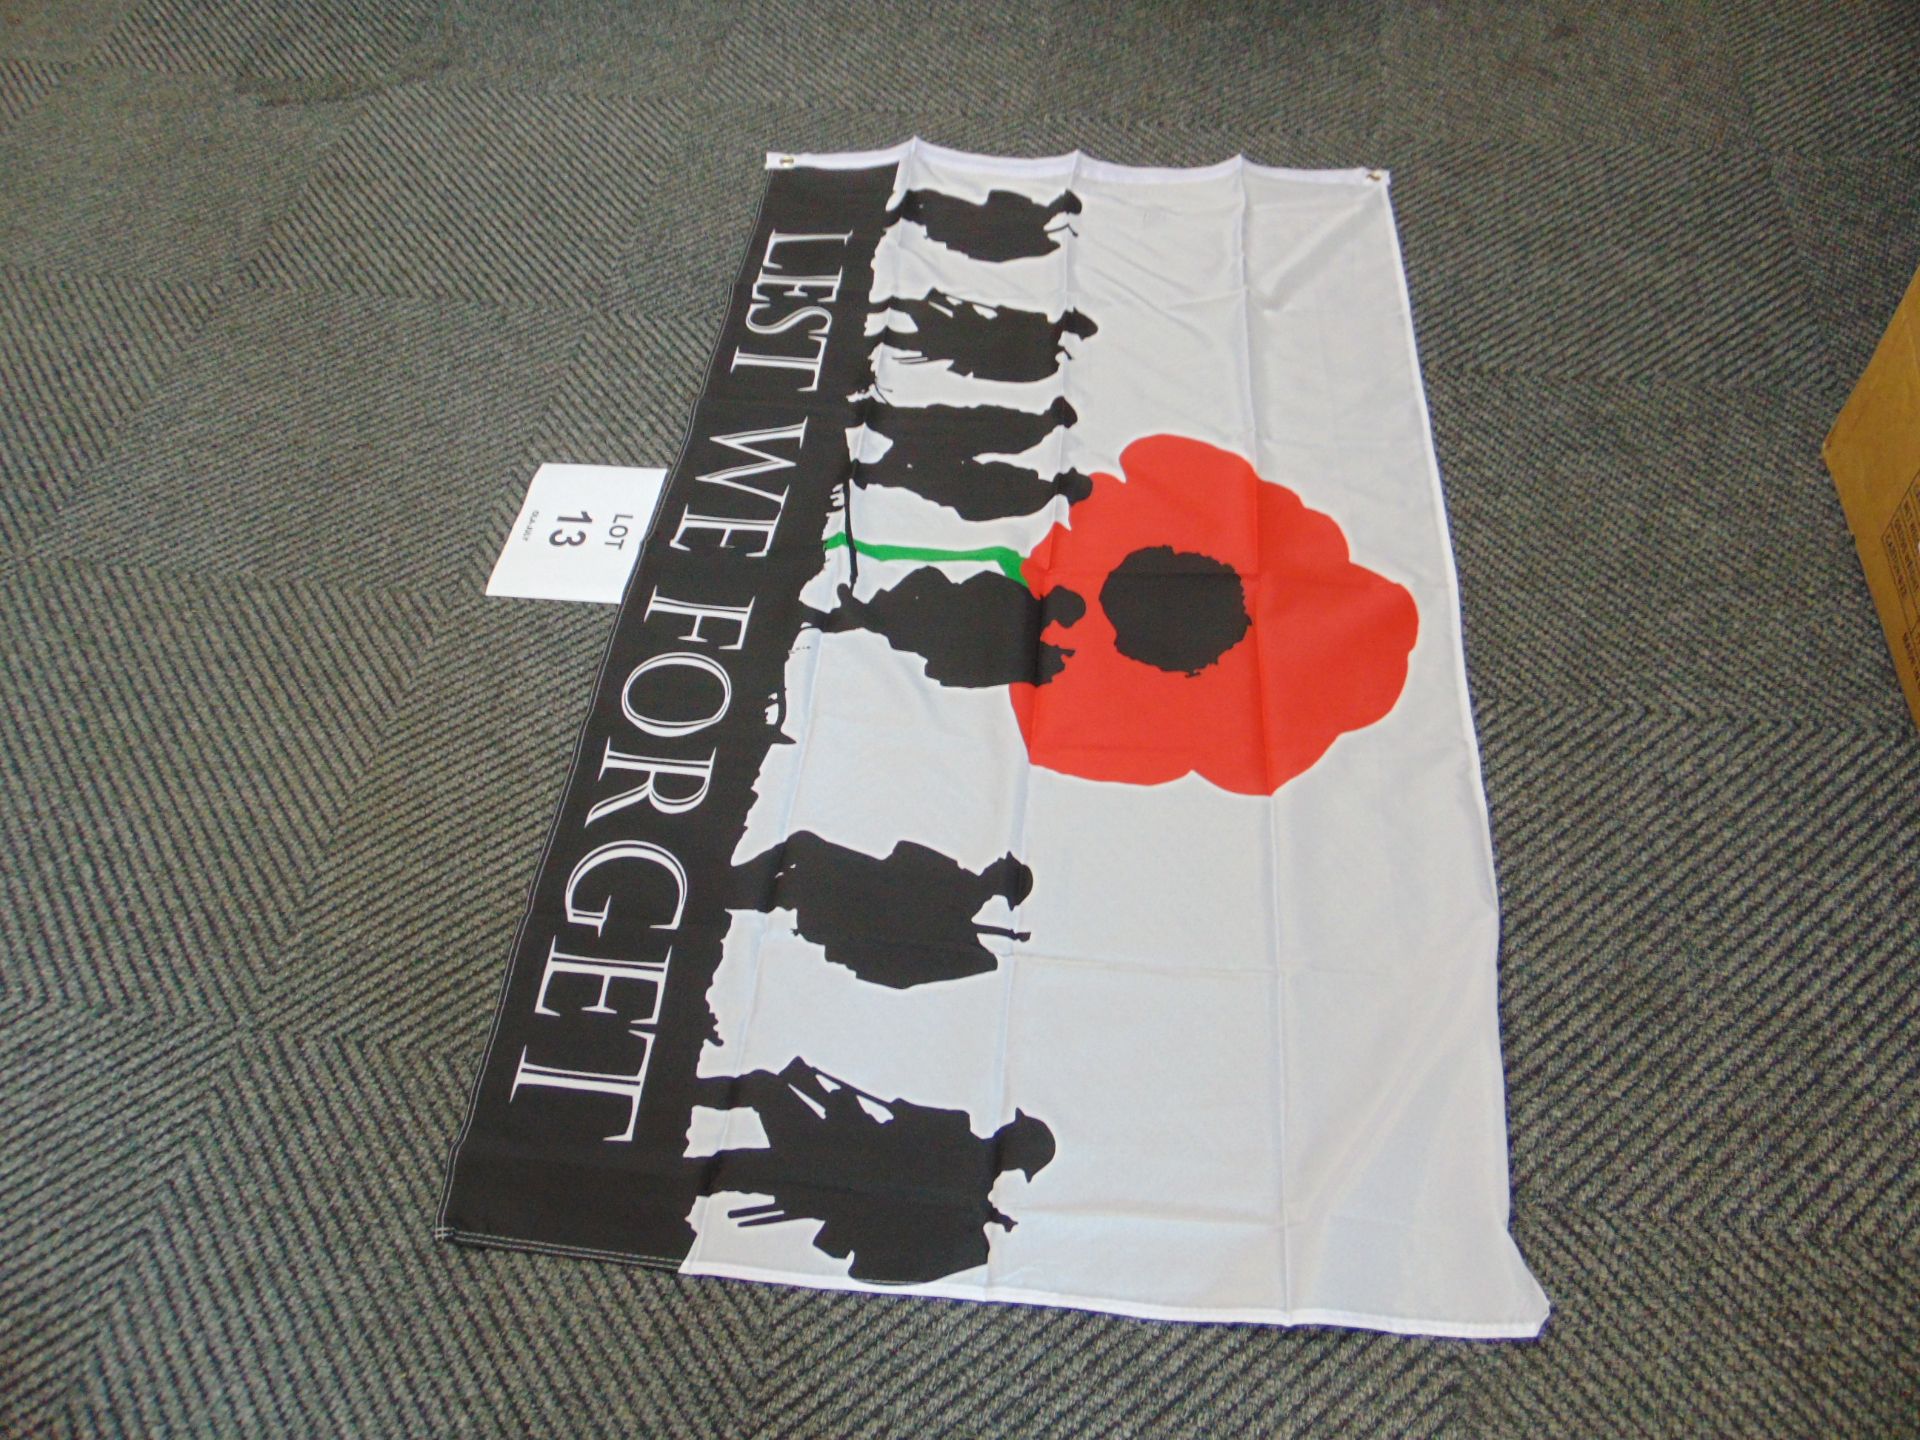 Lest We Forget Army Flag 5ft x 3ft - Image 3 of 3